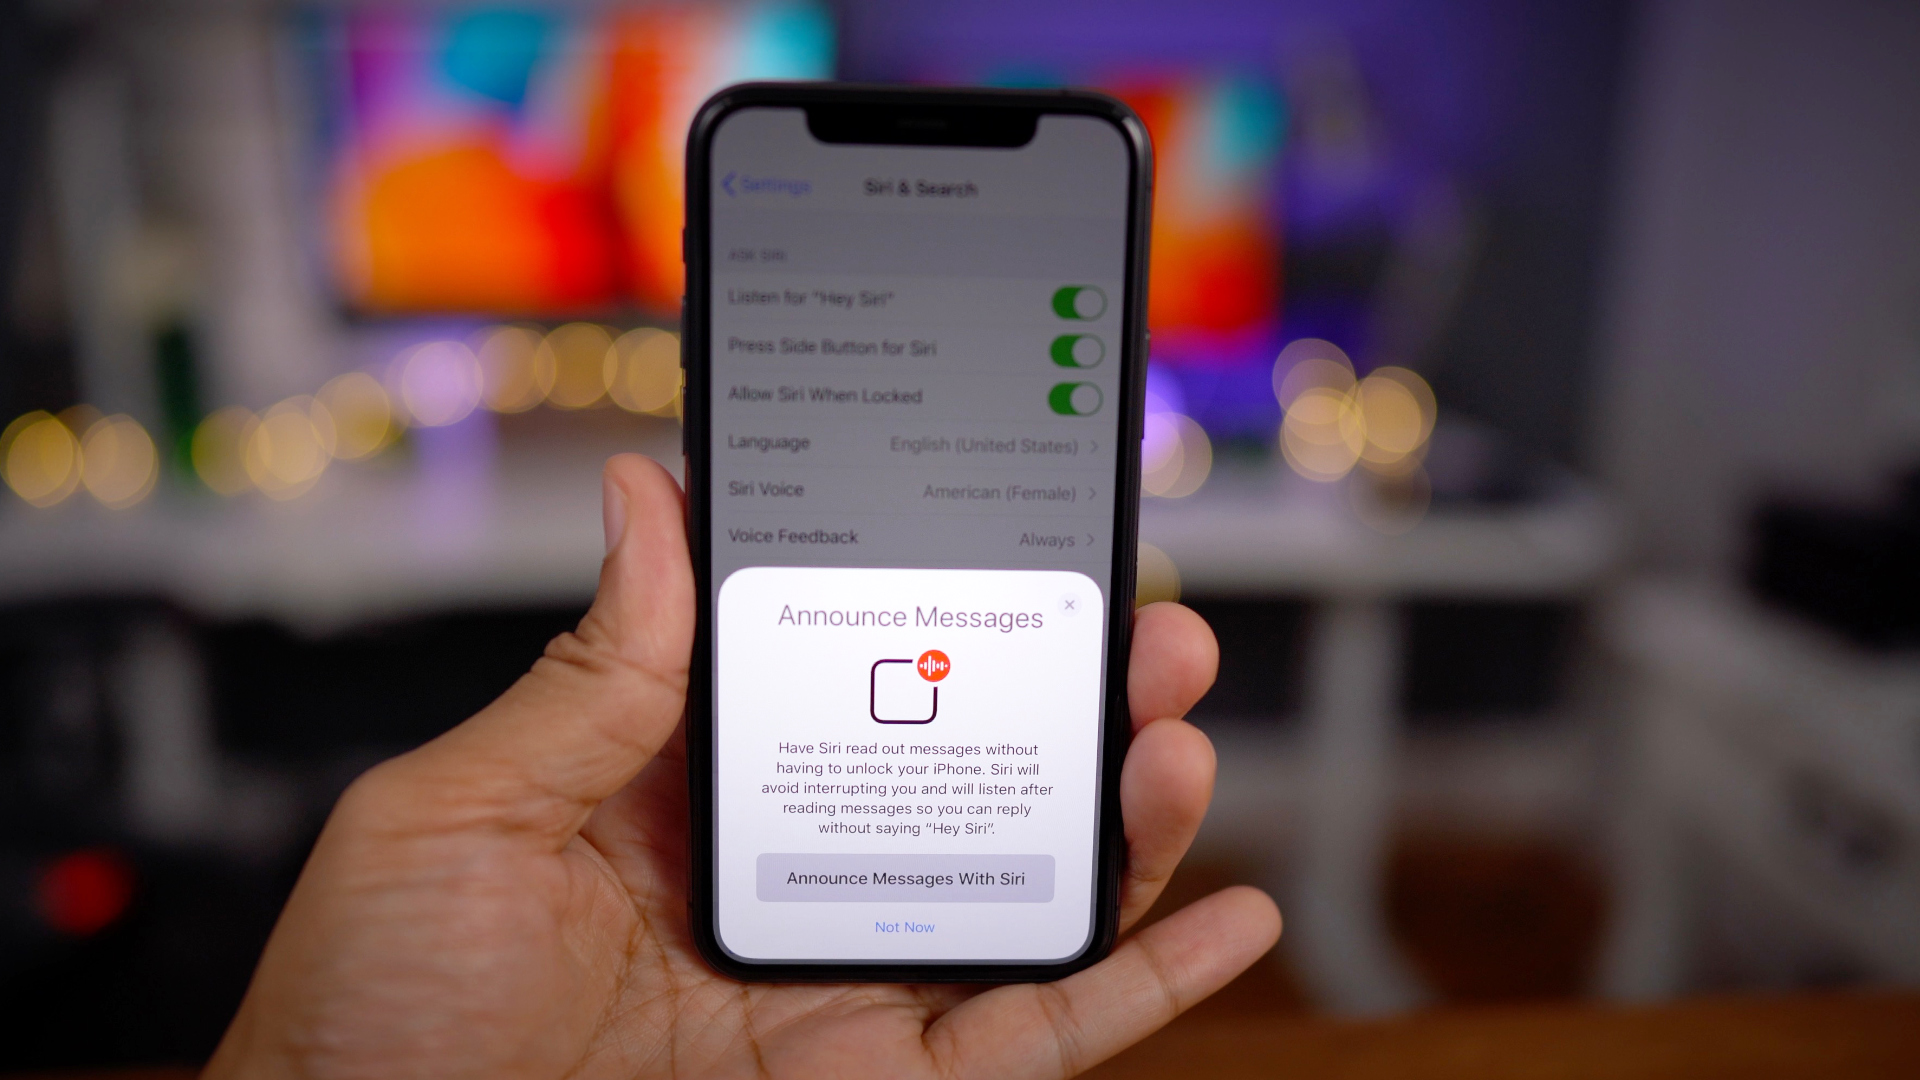 Hands on with new iOS 13.2 beta 1 changes and features [Video] - 9to5Mac thumbnail